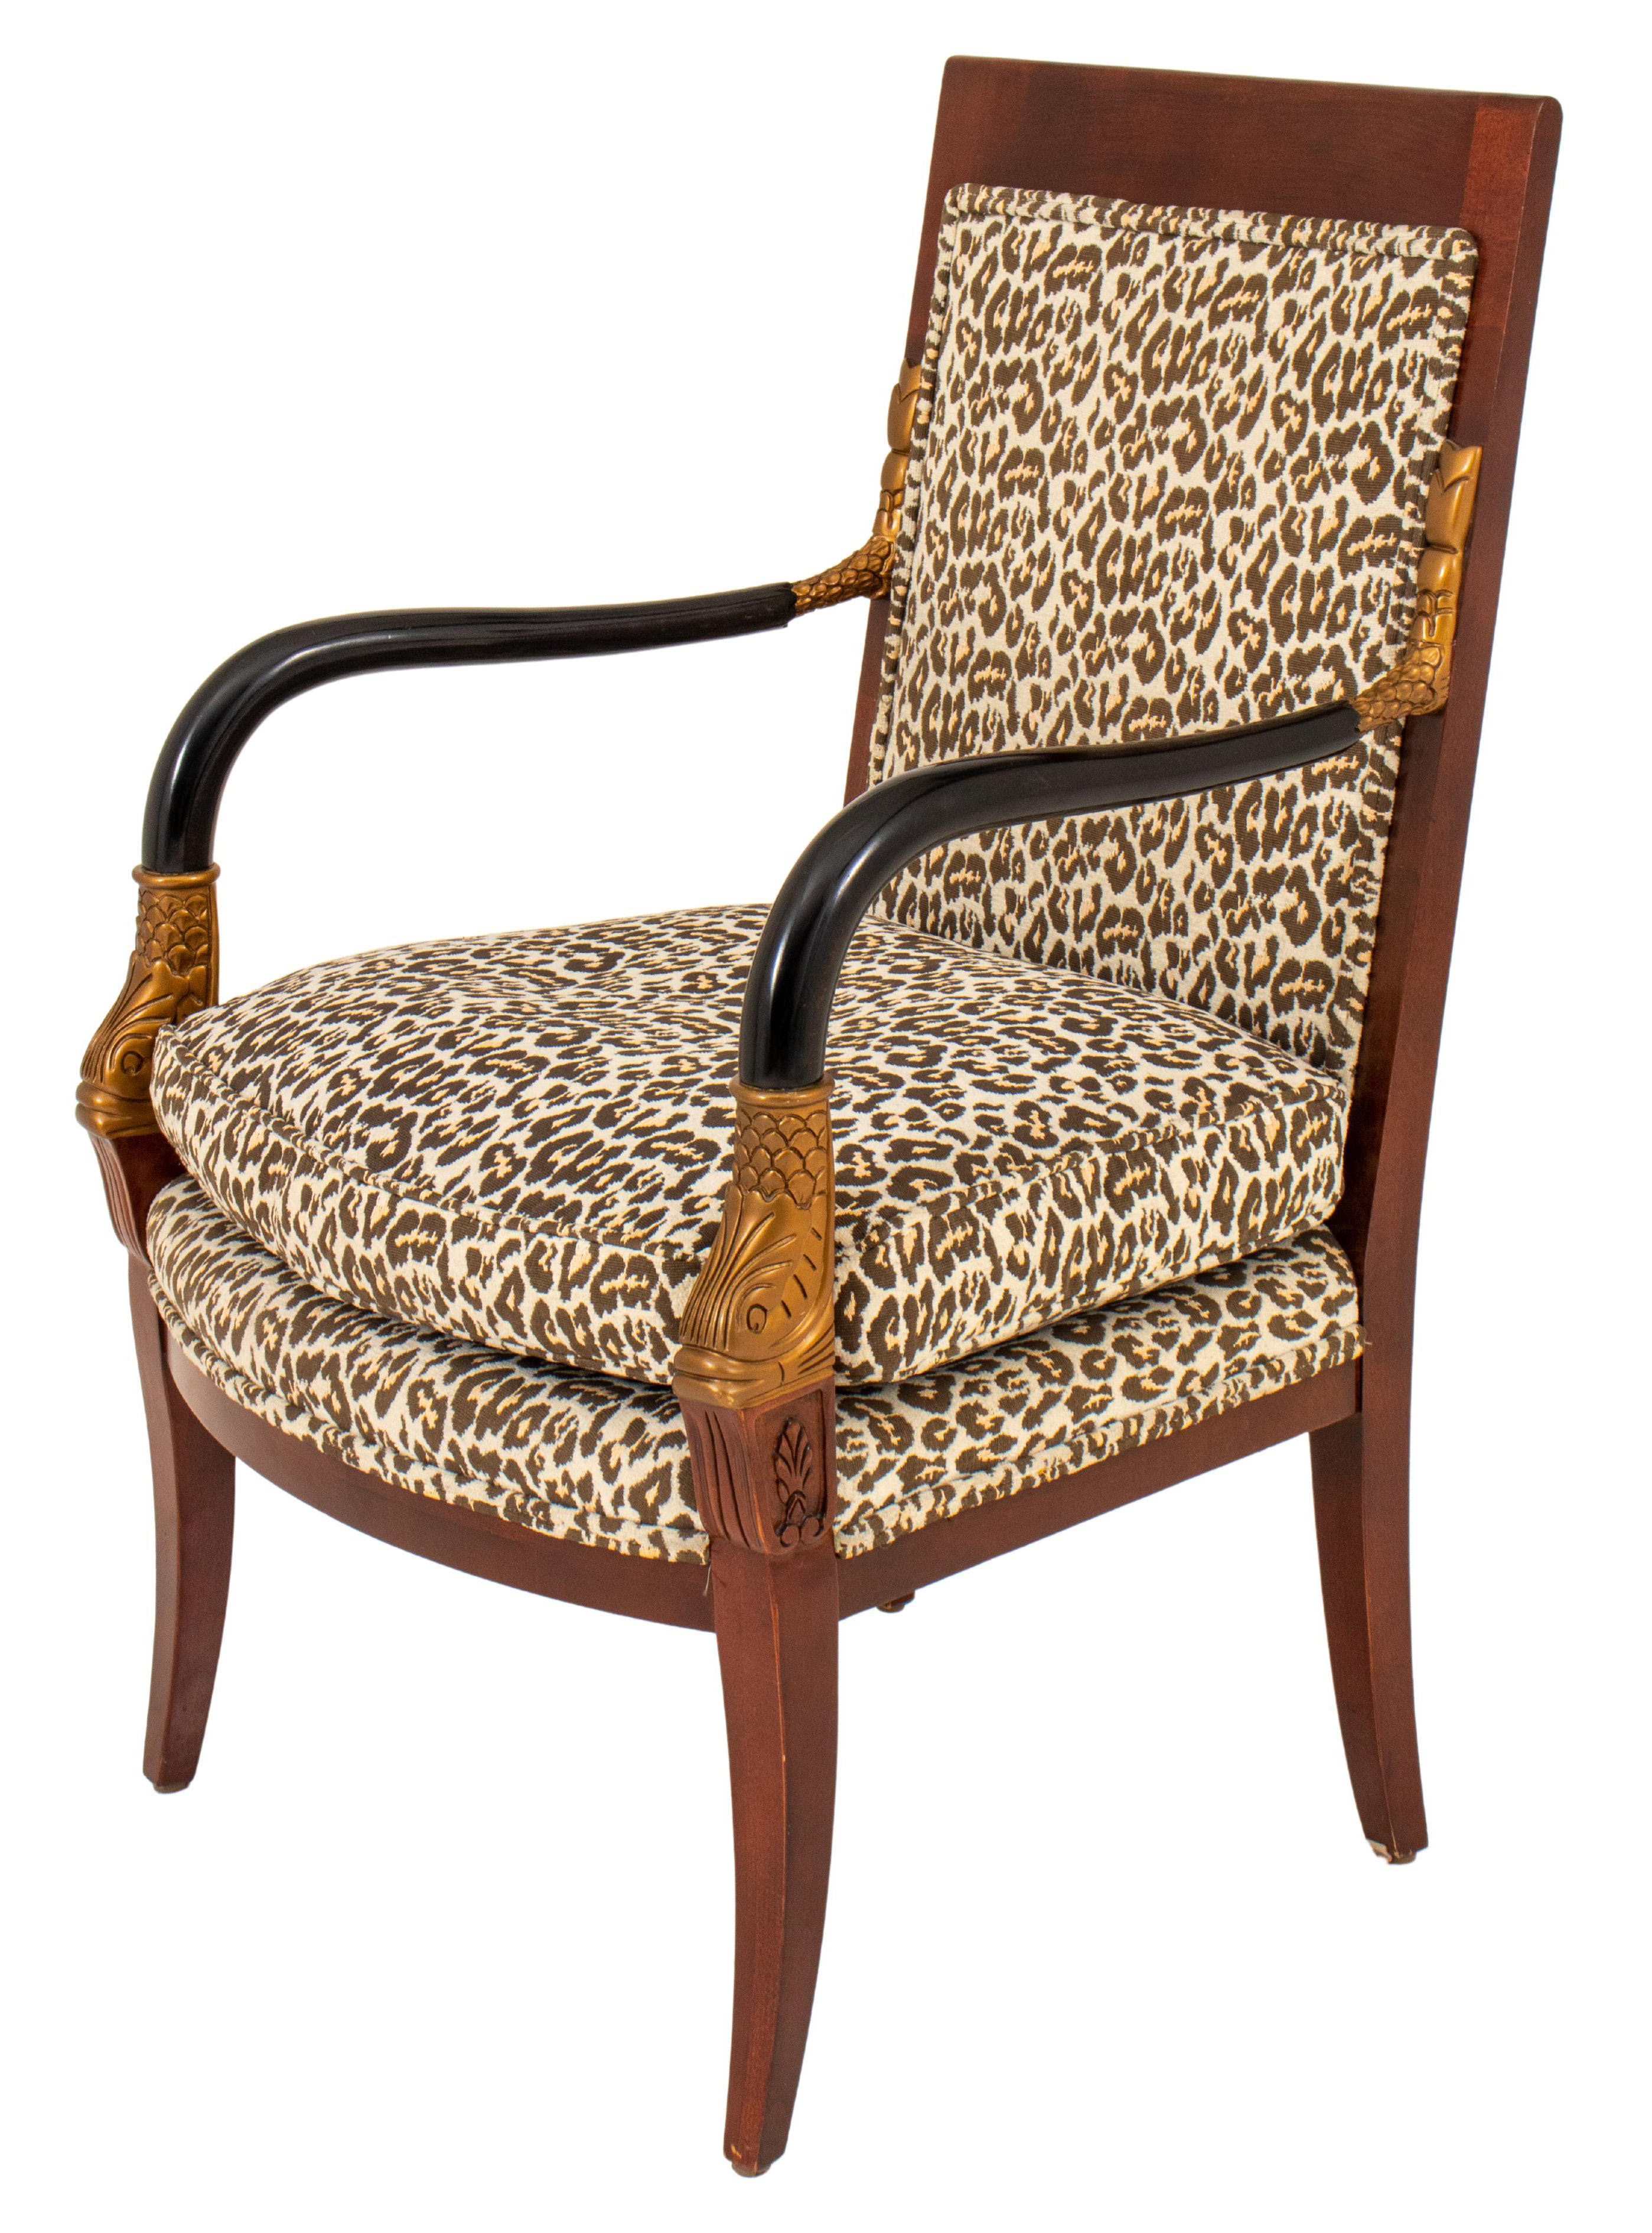 FRENCH CONSULAT STYLE ARM CHAIR